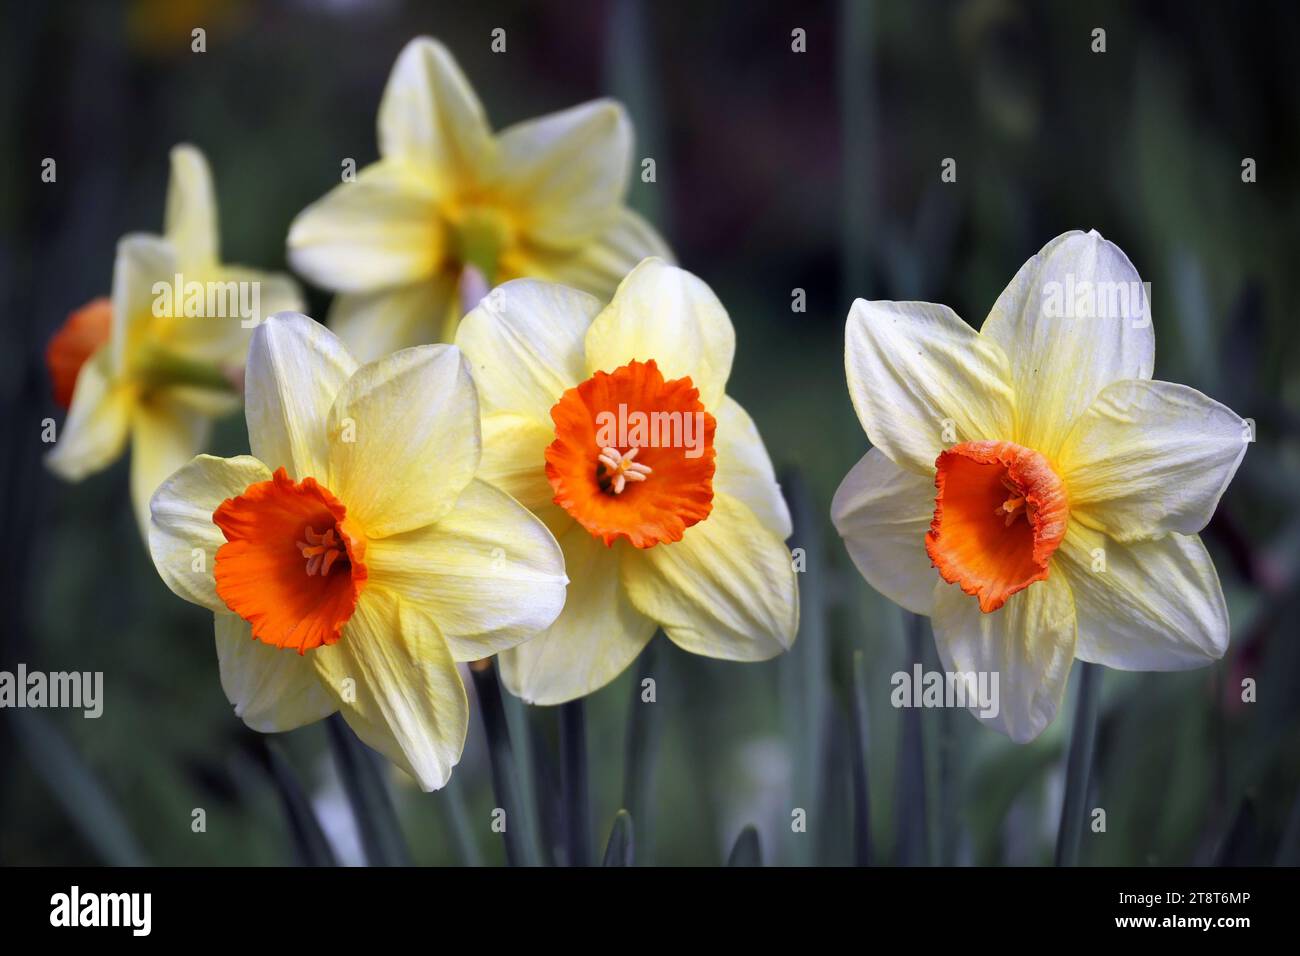 Daffodils, Narcissus is a genus of predominantly spring flowering perennial plants of the amaryllis family, Amaryllidaceae. Various common names including daffodil, narcissus, and jonquil are used to describe all or some members of the genus Stock Photo